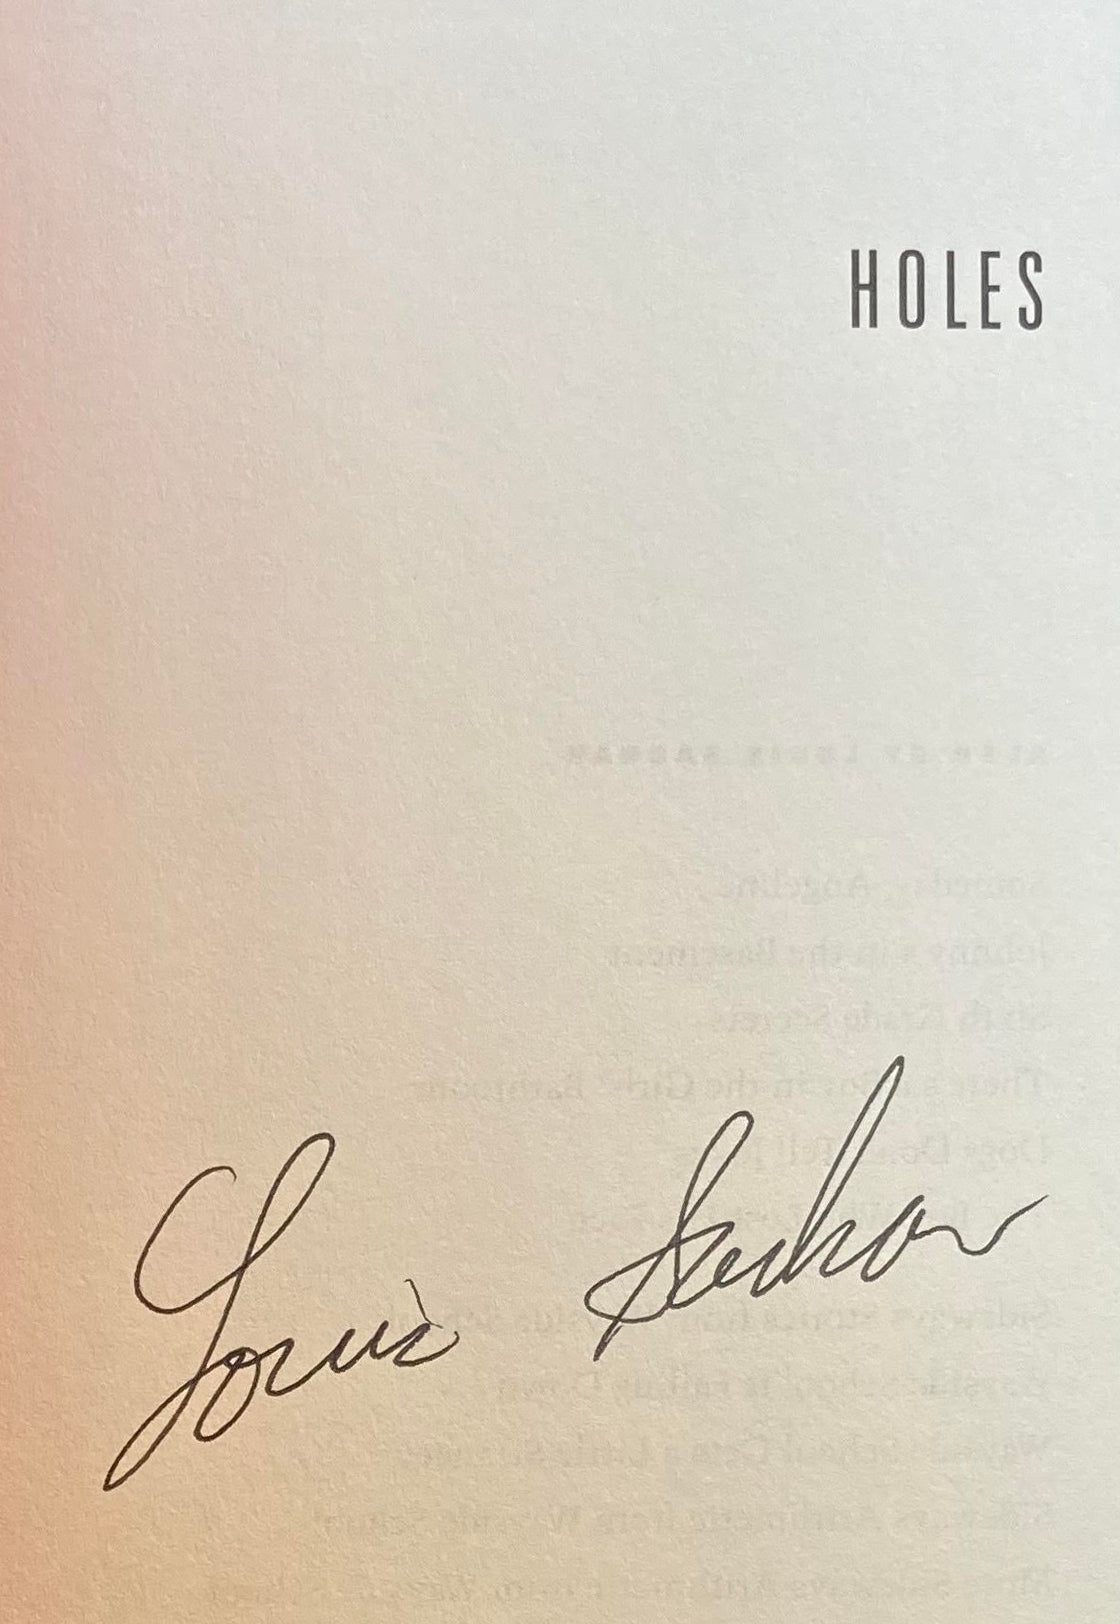 LOUIS SACHAR: Holes, A Signed Edition